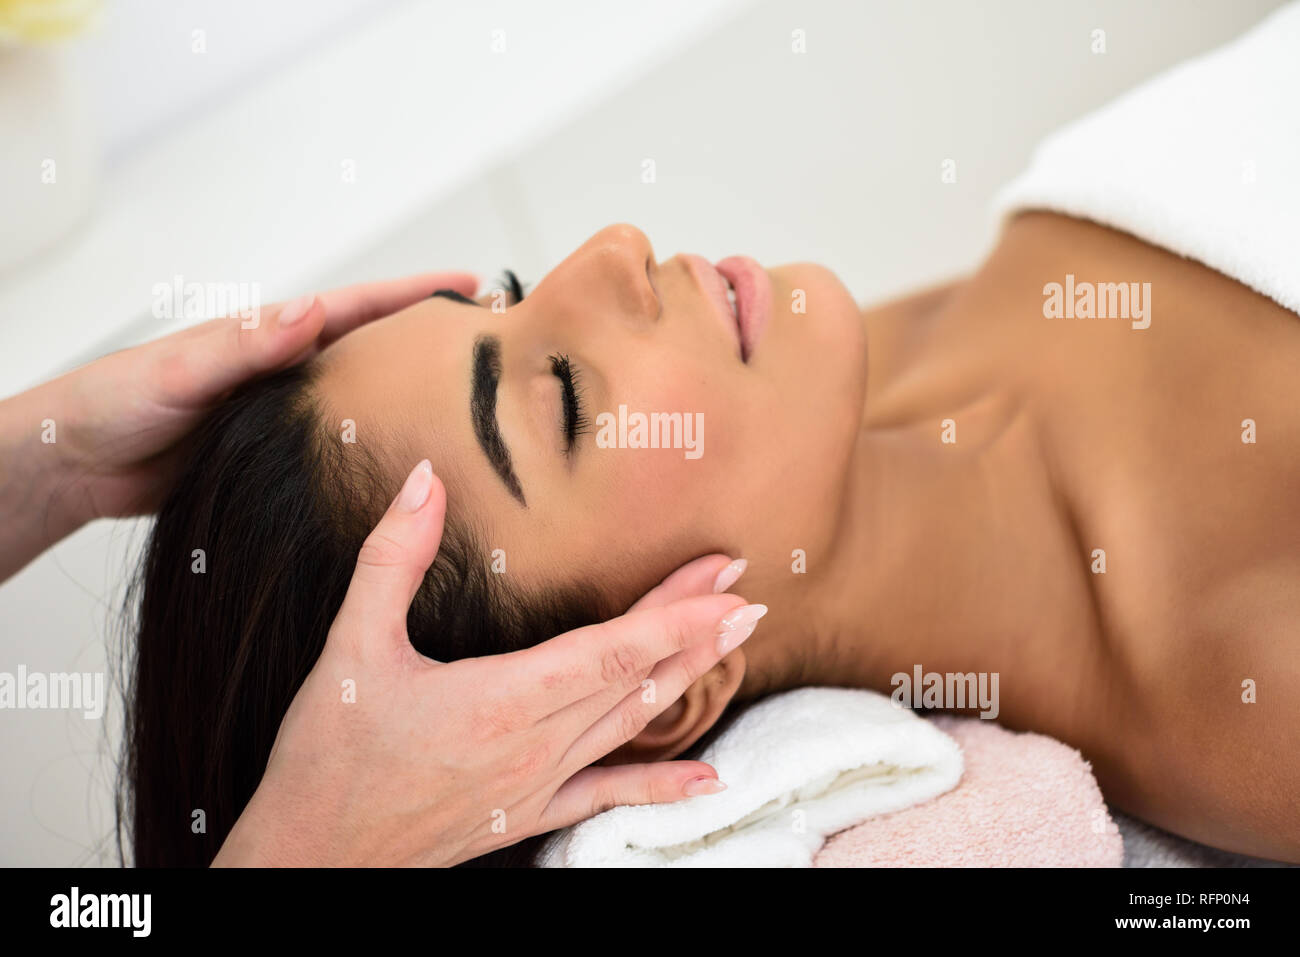 Arab young woman receiving head massage in spa wellness center. Beauty and Aesthetic concepts. Stock Photo